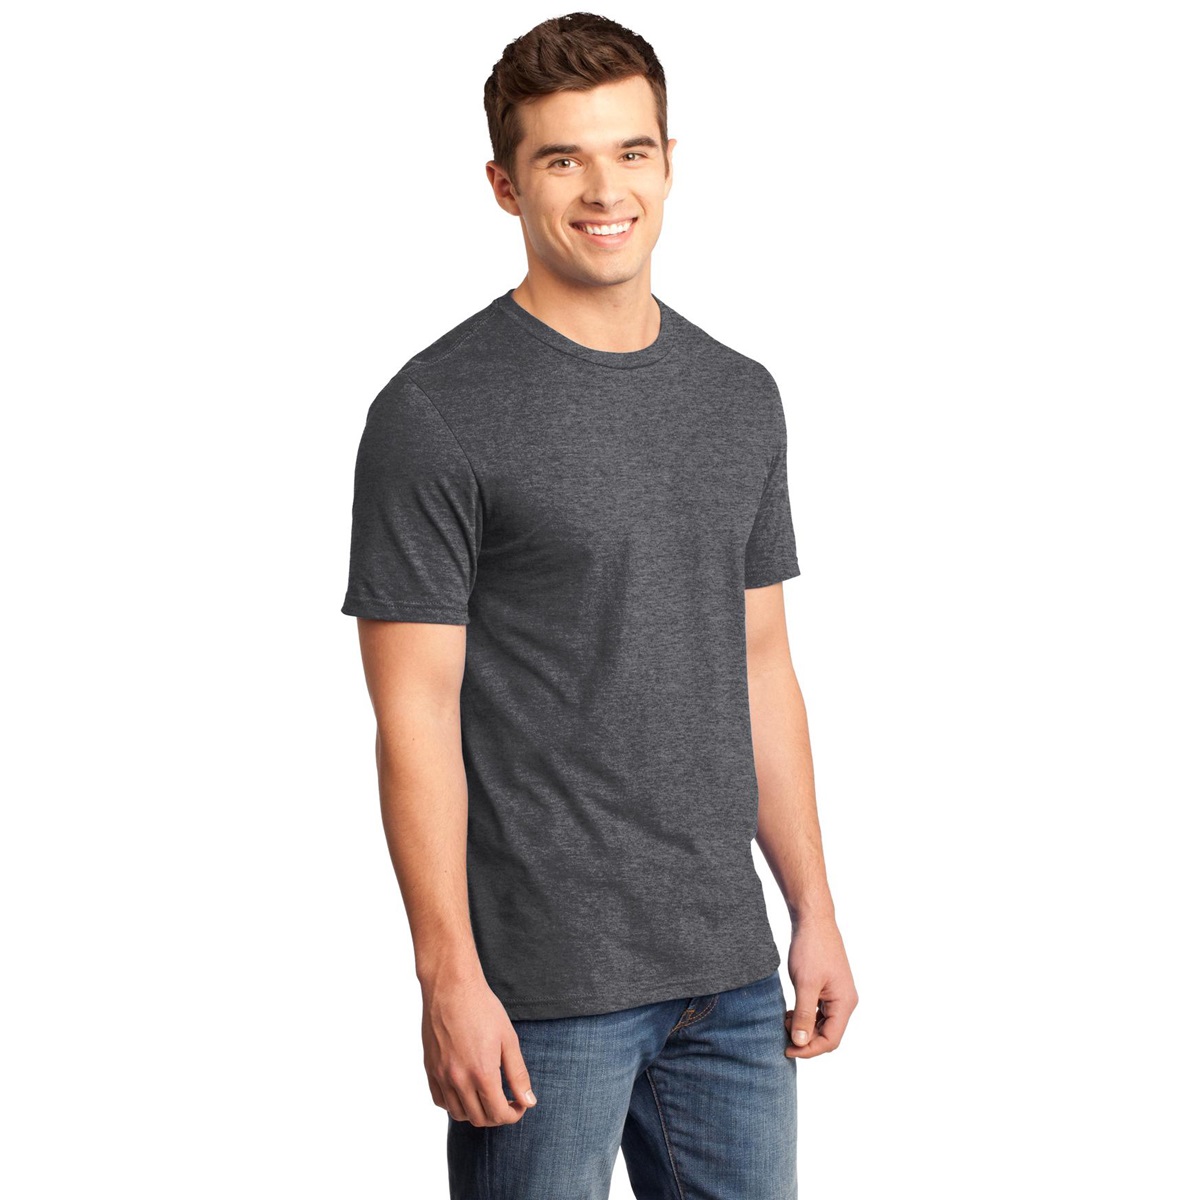 District DT6000 Very Important Tee - Heathered Charcoal | FullSource.com